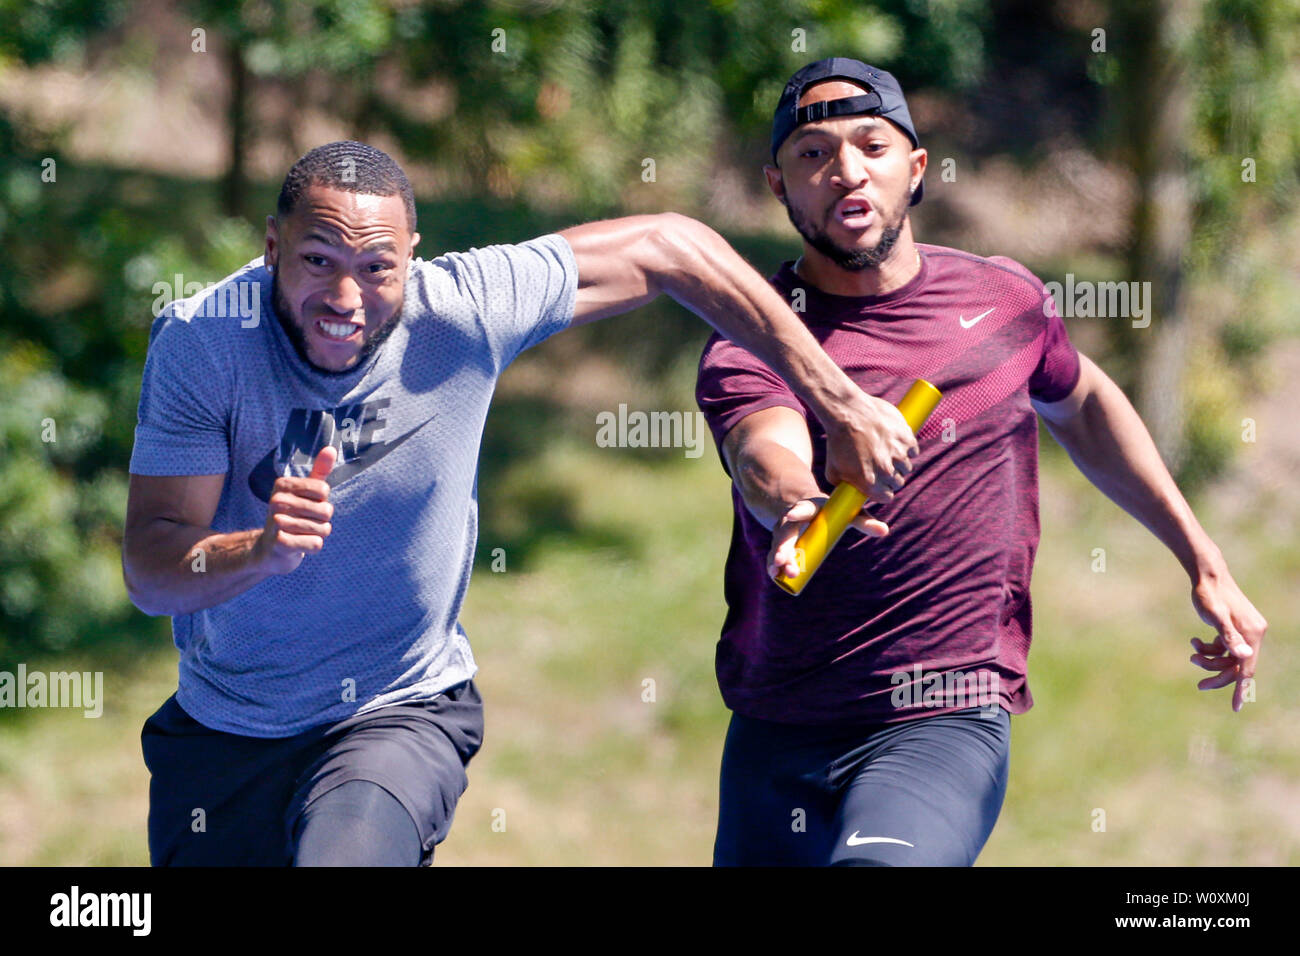 Arnhem, Netherlands. 27th June, 2019. ARNHEM, 27-06-2019, Papendal training centre, (L-R) Christopher Garia and Hensley Paulina during the 4 x 100m relay training of the Dutch team Credit: Pro Shots/Alamy Live News Stock Photo